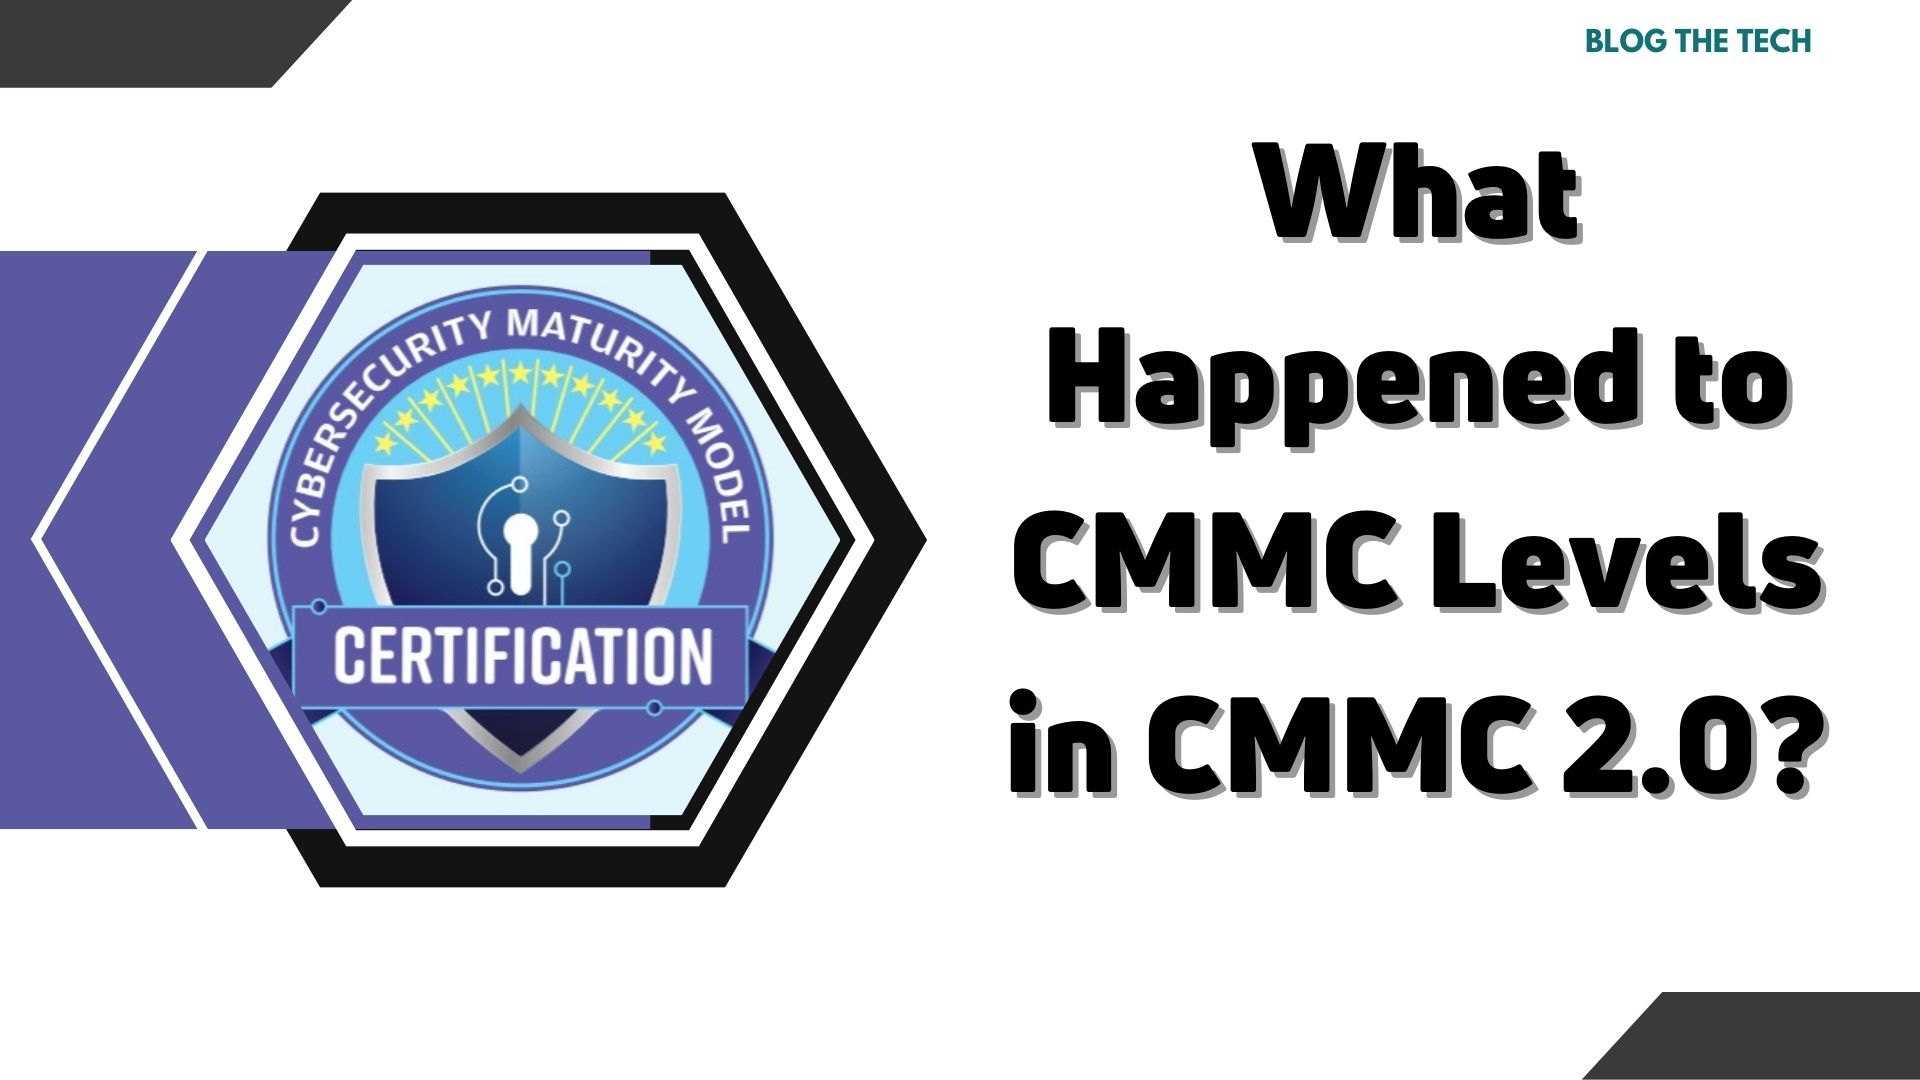 What Happened to CMMC Levels in CMMC 2.0?